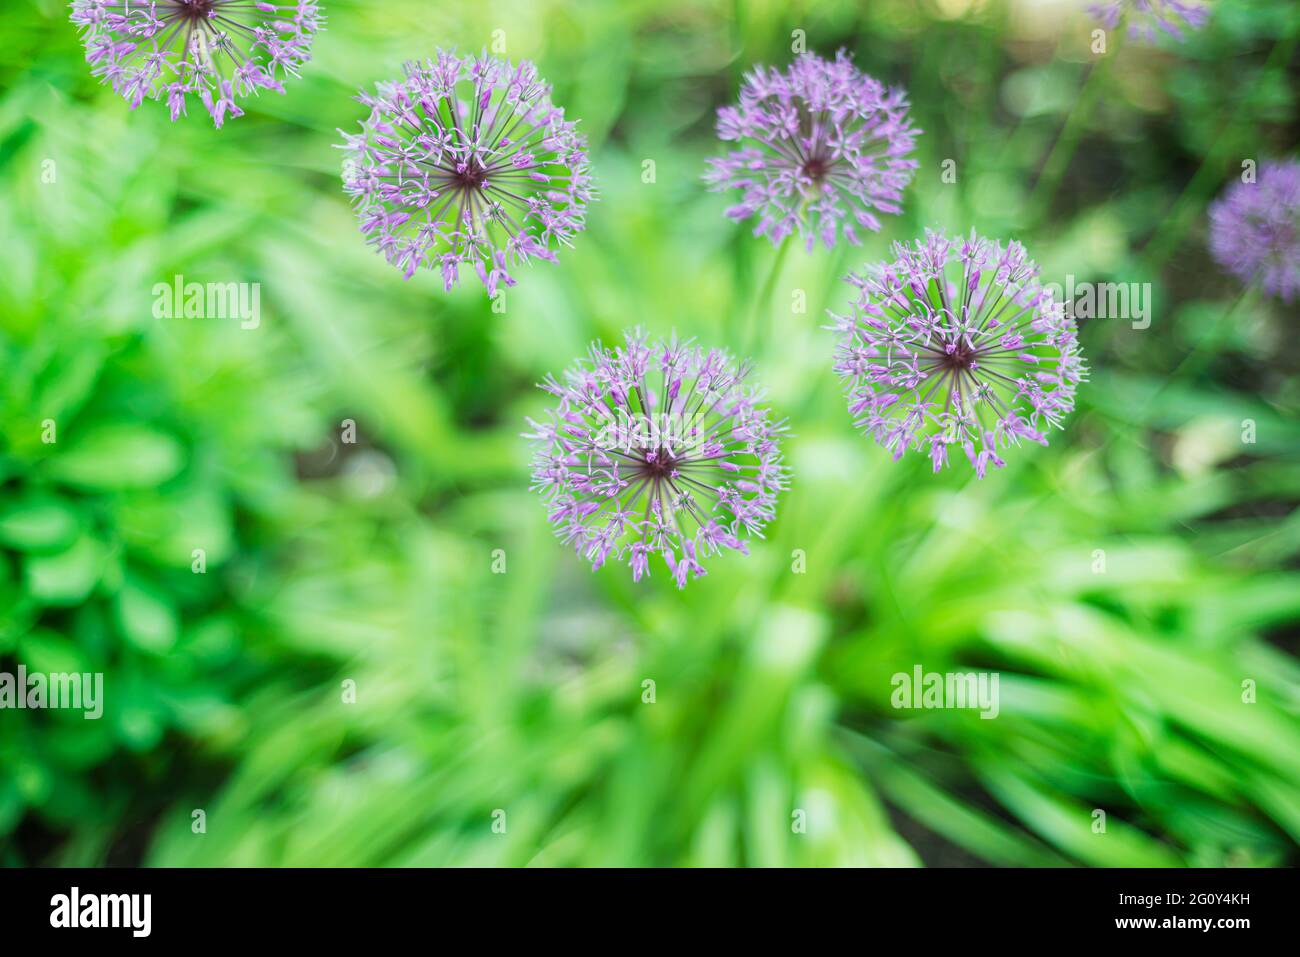 Natural green backgrounds with lilac globular flowers. Allium. Decorative bow. Stock Photo